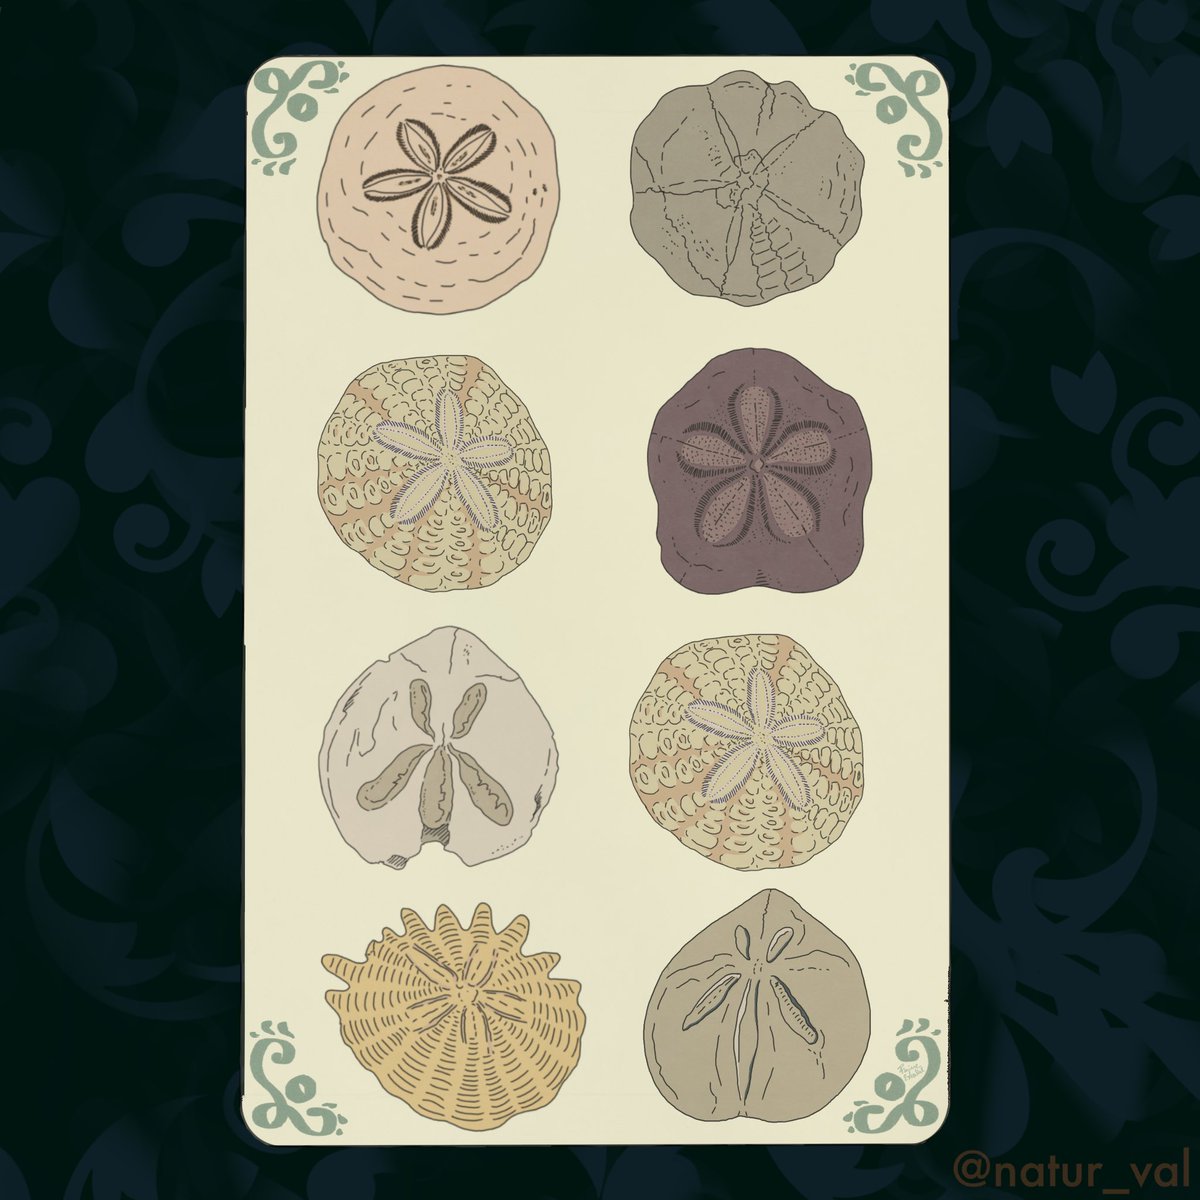 Tarots Before Time - Deniers. The suit of Pentacles. I chose “sand dollars” fossils, i.e. echinoids of the Dendrasteridae family characterized by a rounded and flattened shape that resembles a coin. P.S. There are actually a couple of interlopers from other genres. 8: change